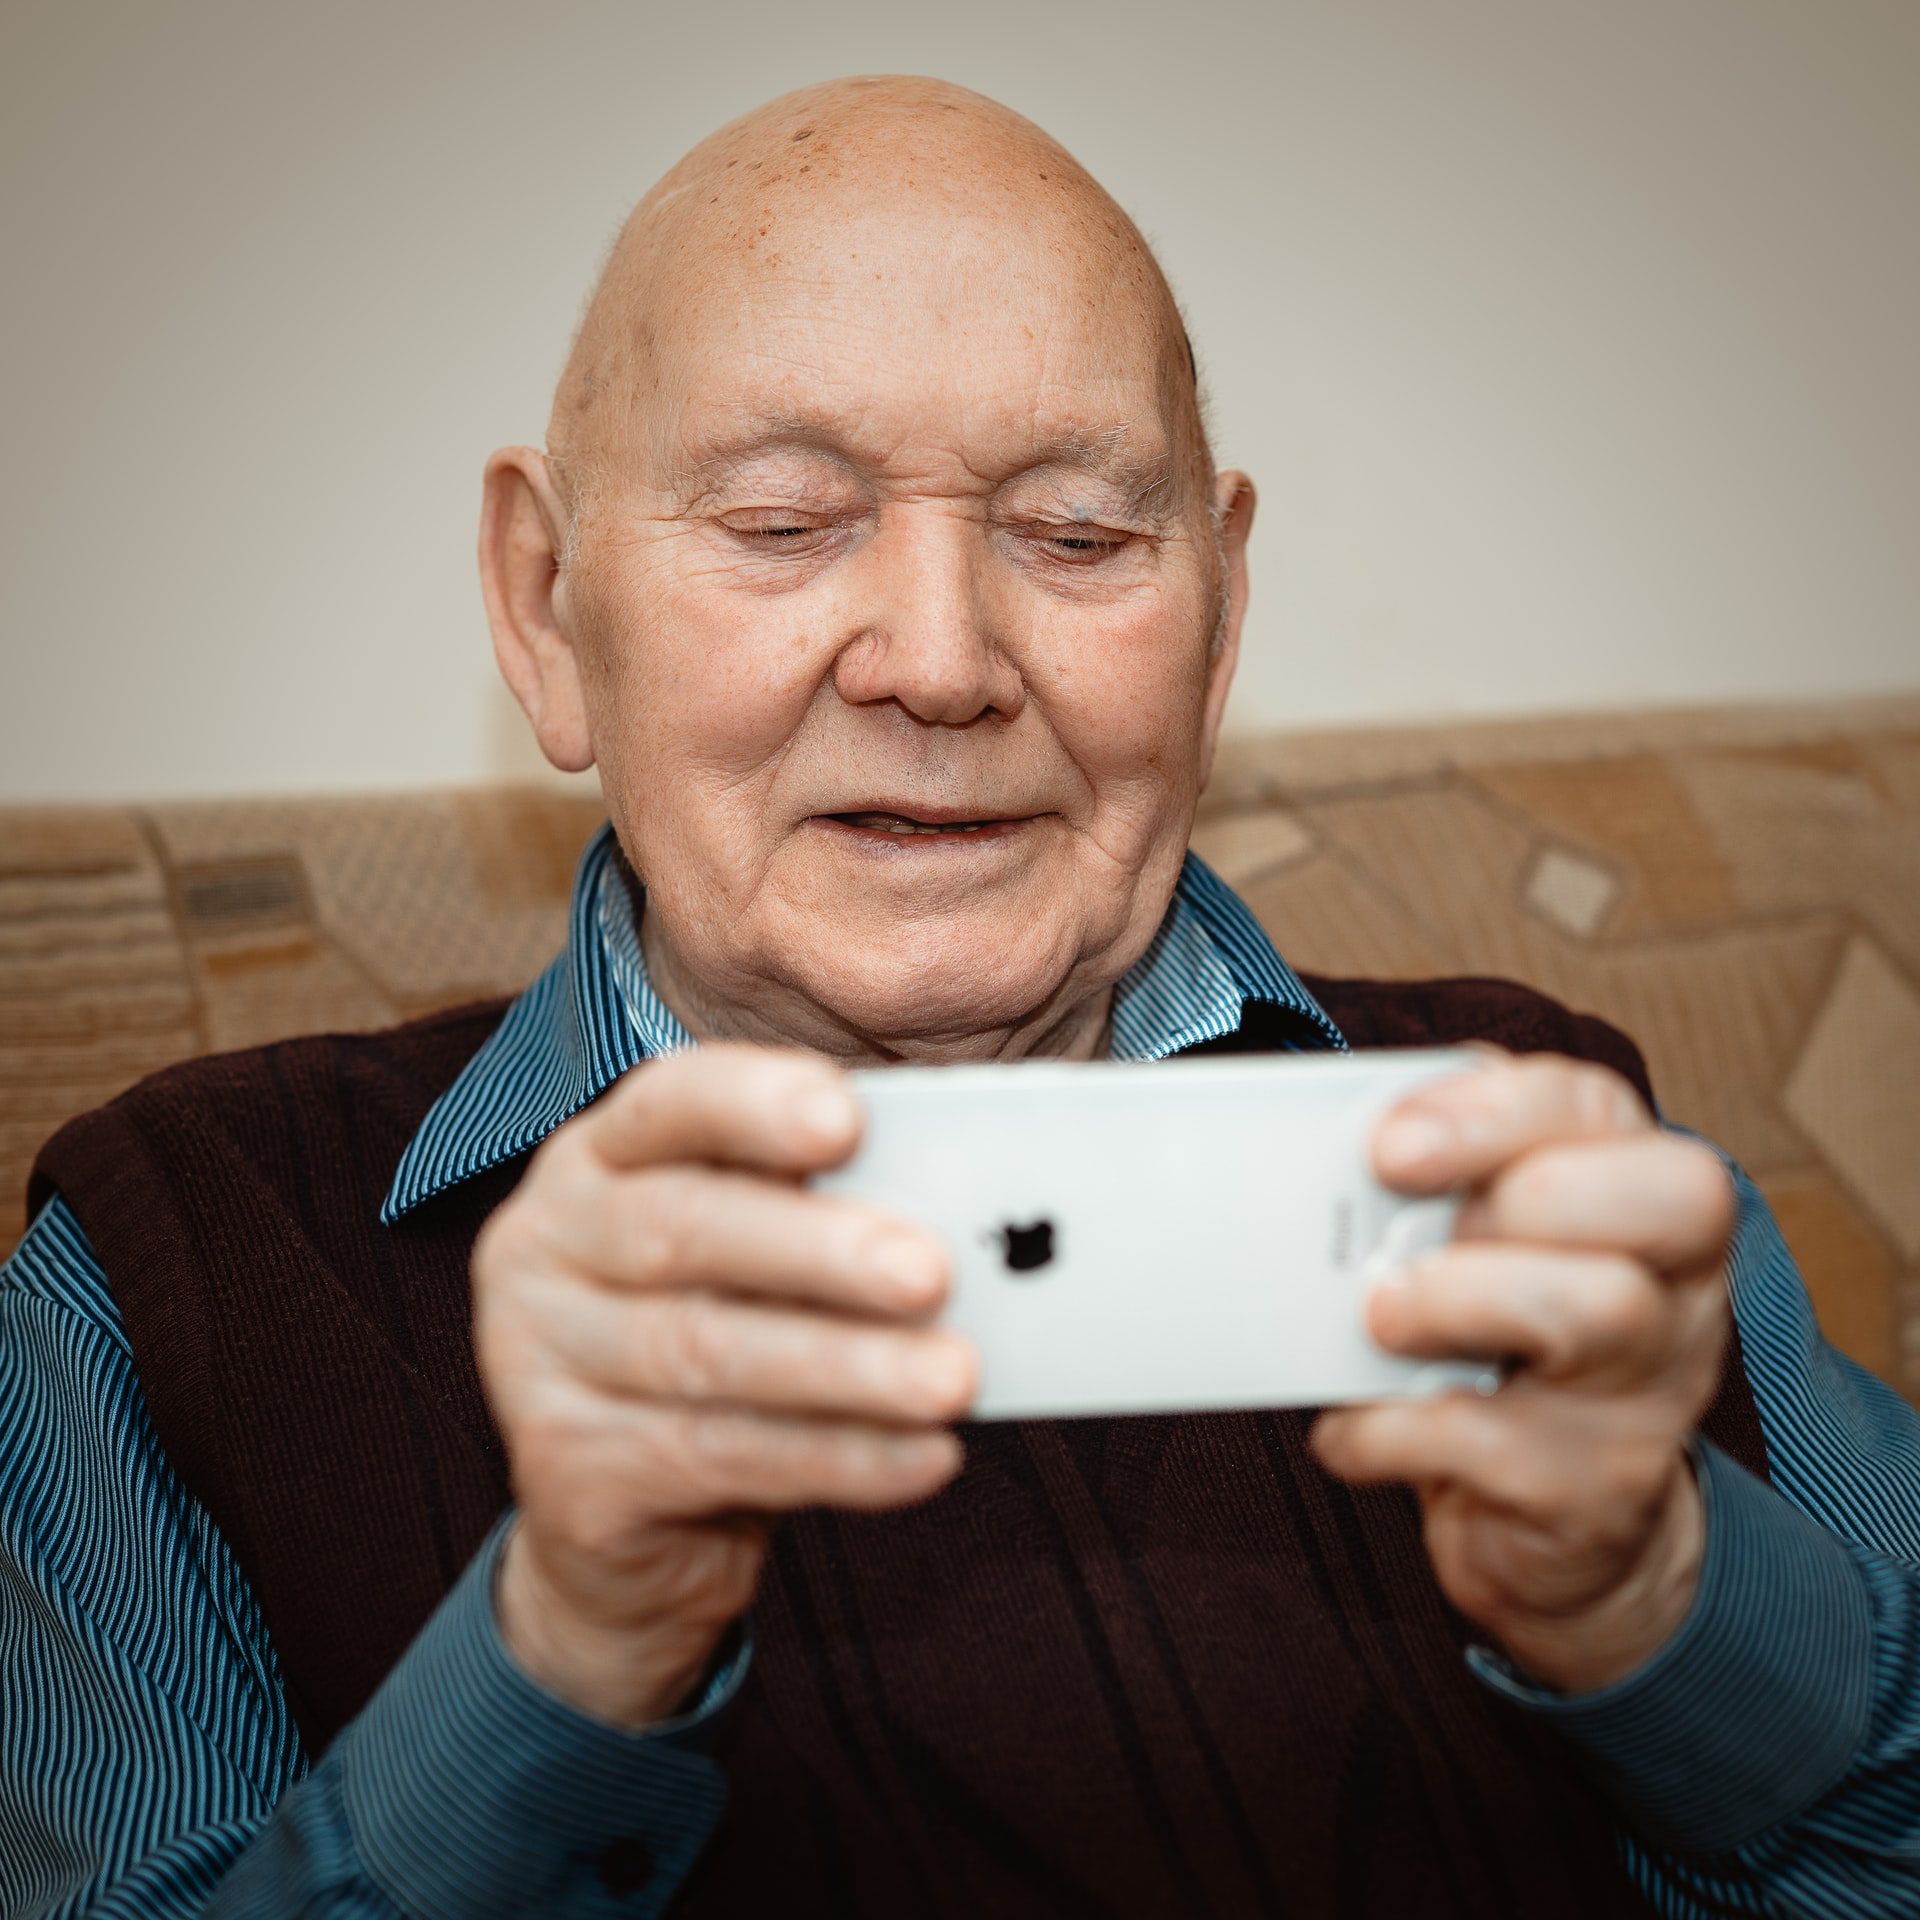 Photos & Music for Seniors With Memory Loss